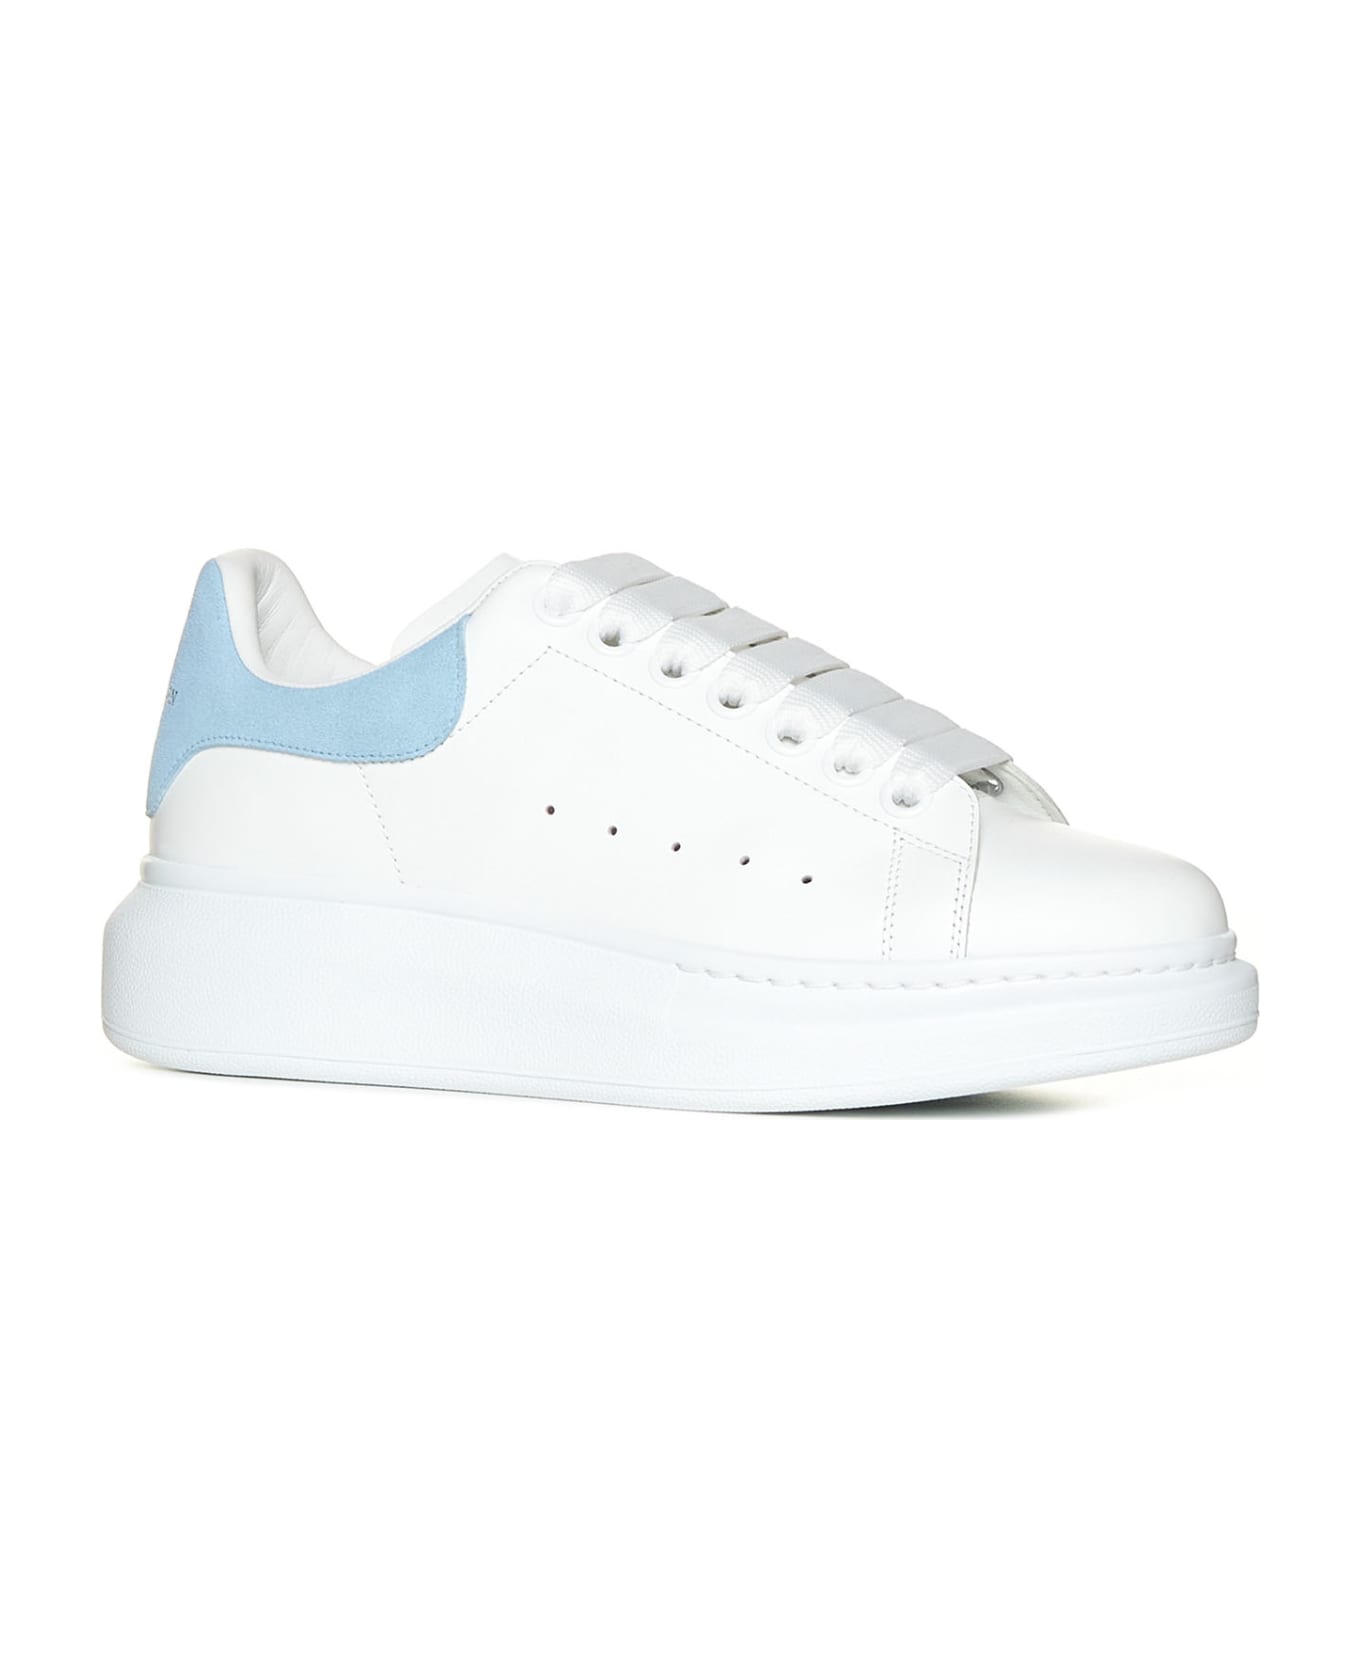 Alexander McQueen Sneakers In Leather And Light Blue Heel - White/powder Blue ウェッジシューズ